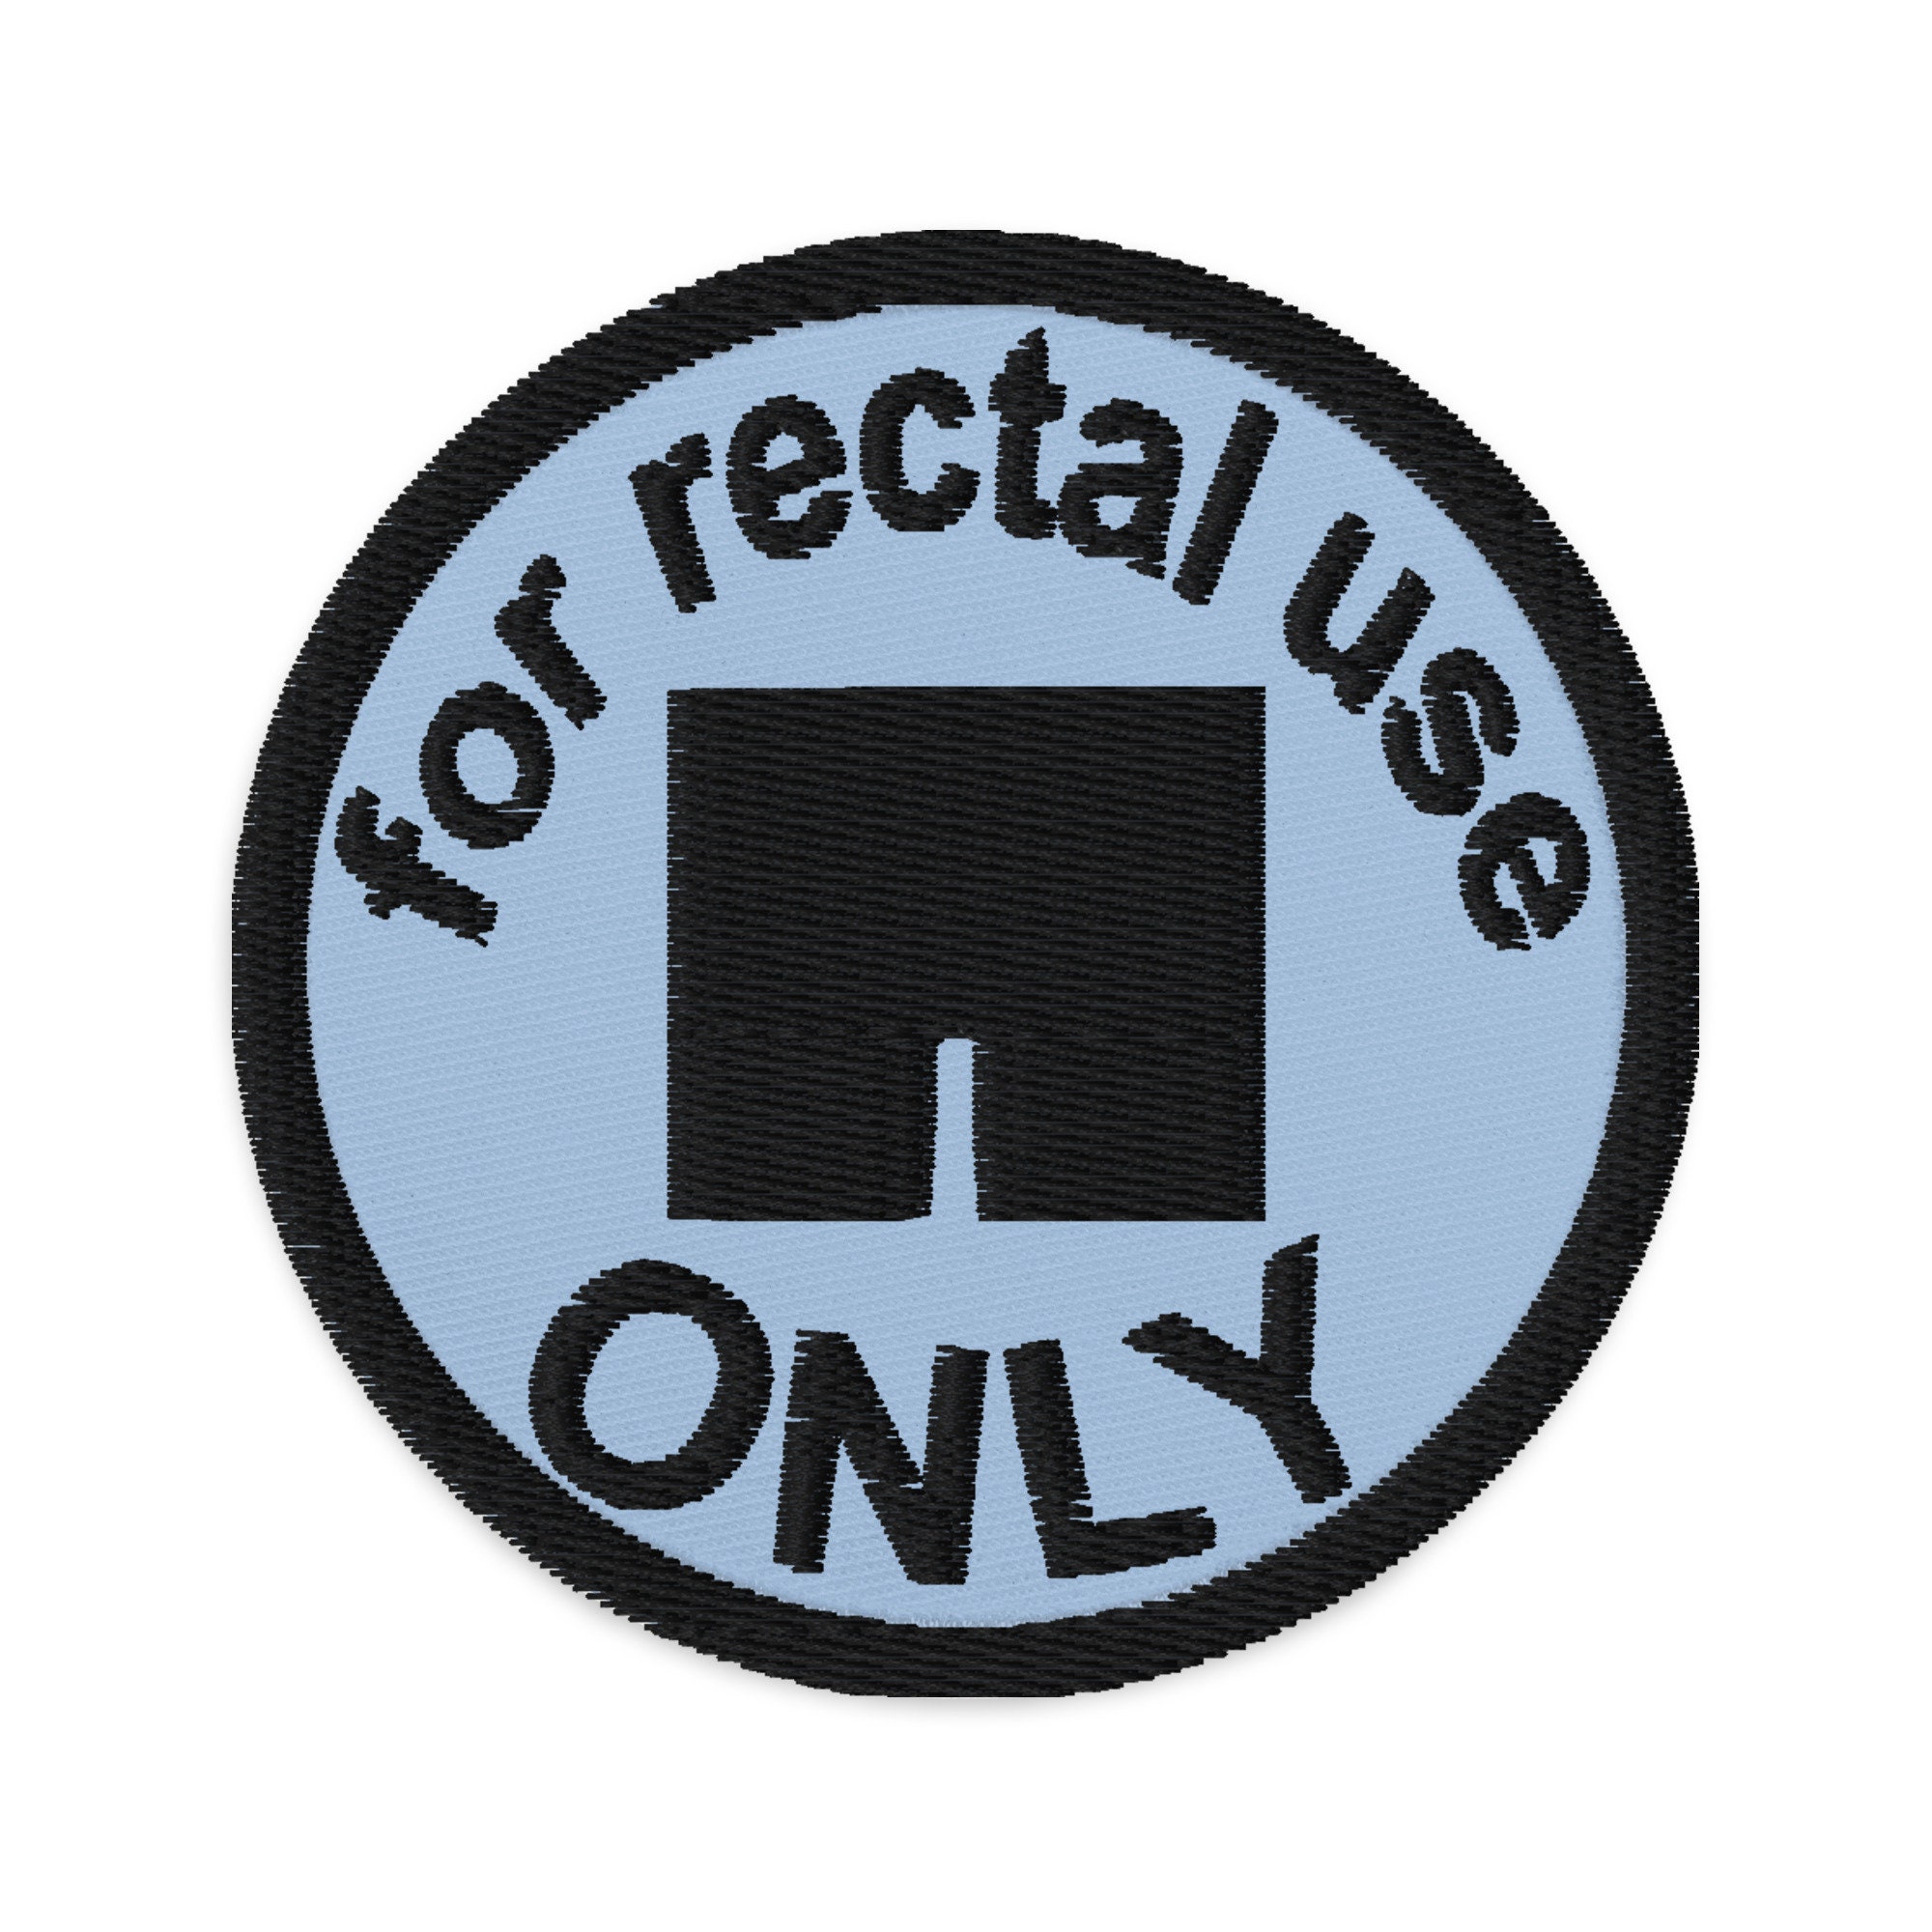 For Rectal Use Only Gag Label Stickers 1 x 2.625 Fluorescent Stickers  with Permanent Adhesive 10 Labels per Order - The Mislabeled Specimen